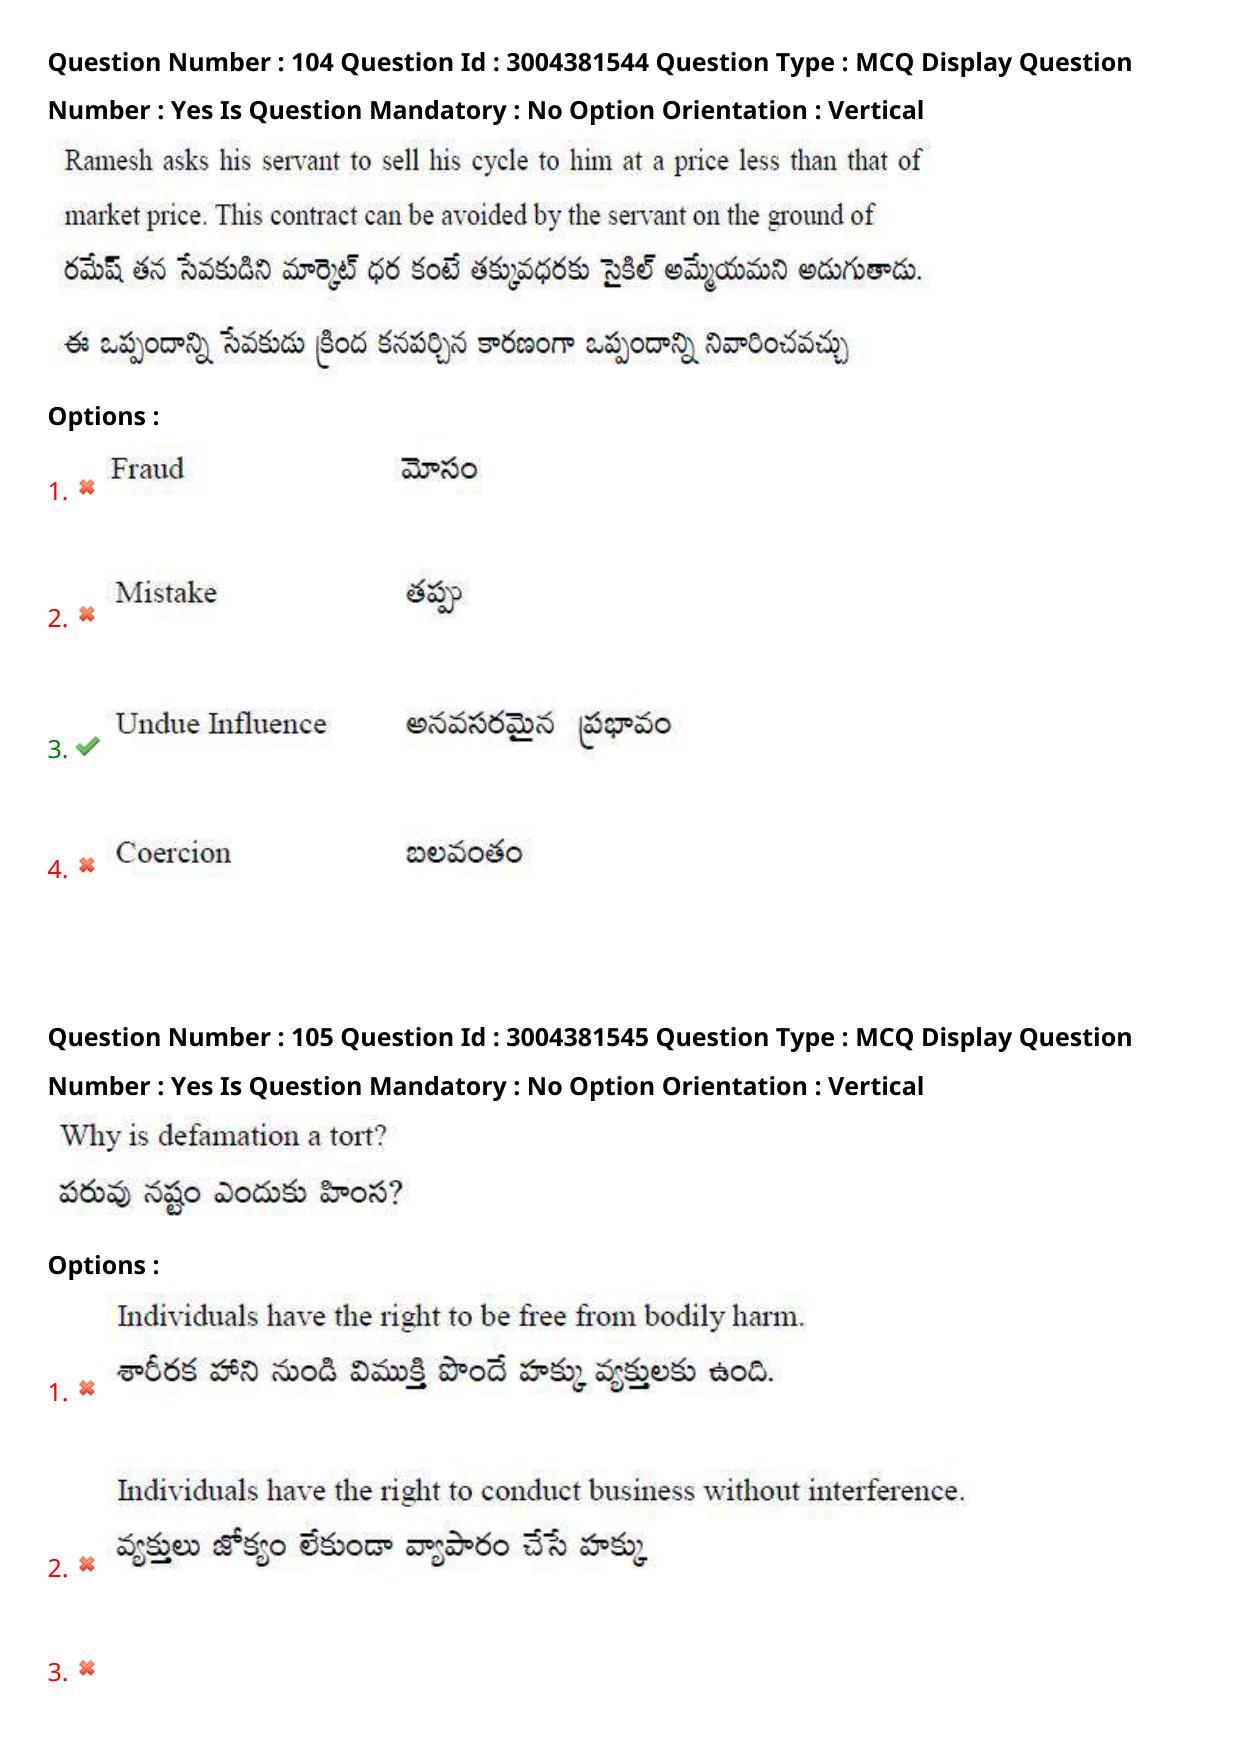 AP LAWCET 2020 - 3 Year LLB Question Paper With Keys - Page 67